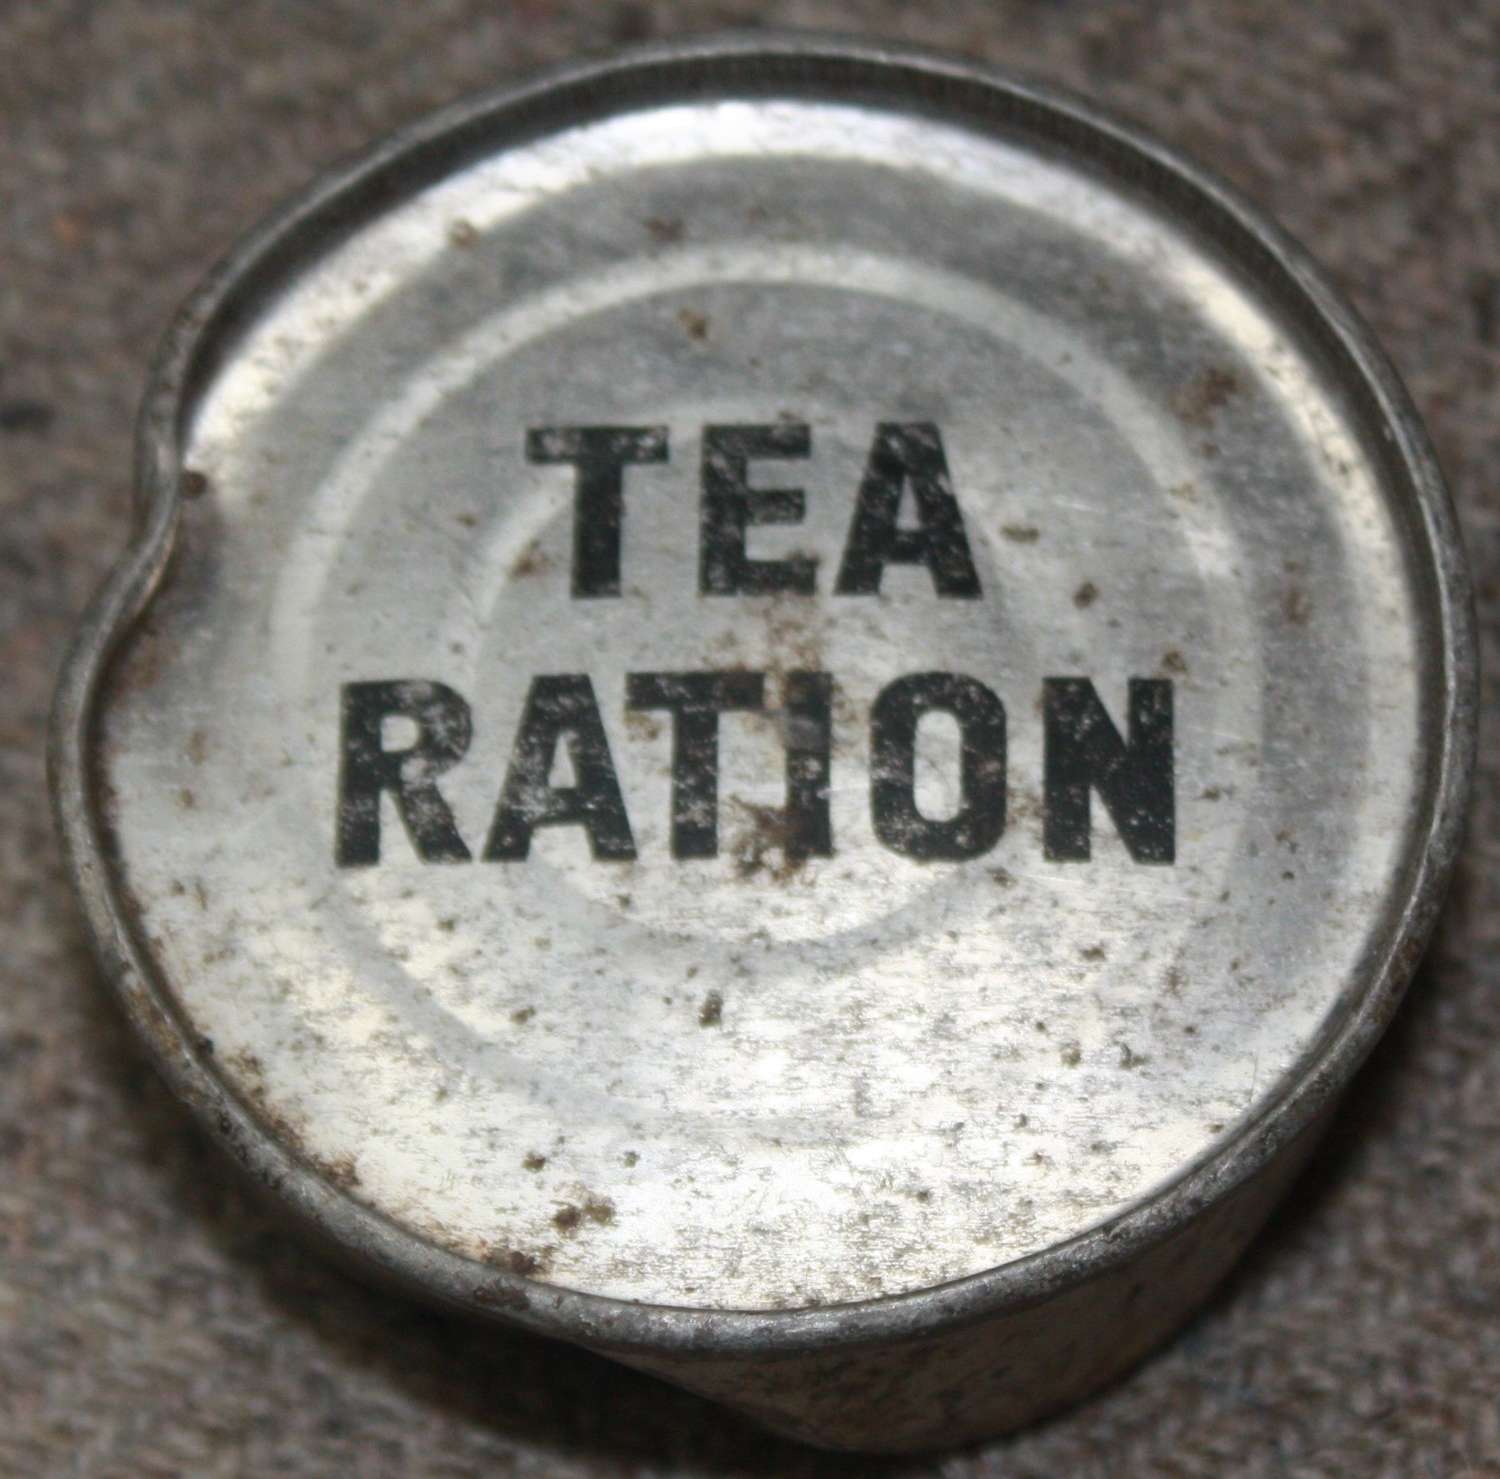 A WWII PERIOD SMALL ROUND TEA RATION TIN WHICH IS FULL